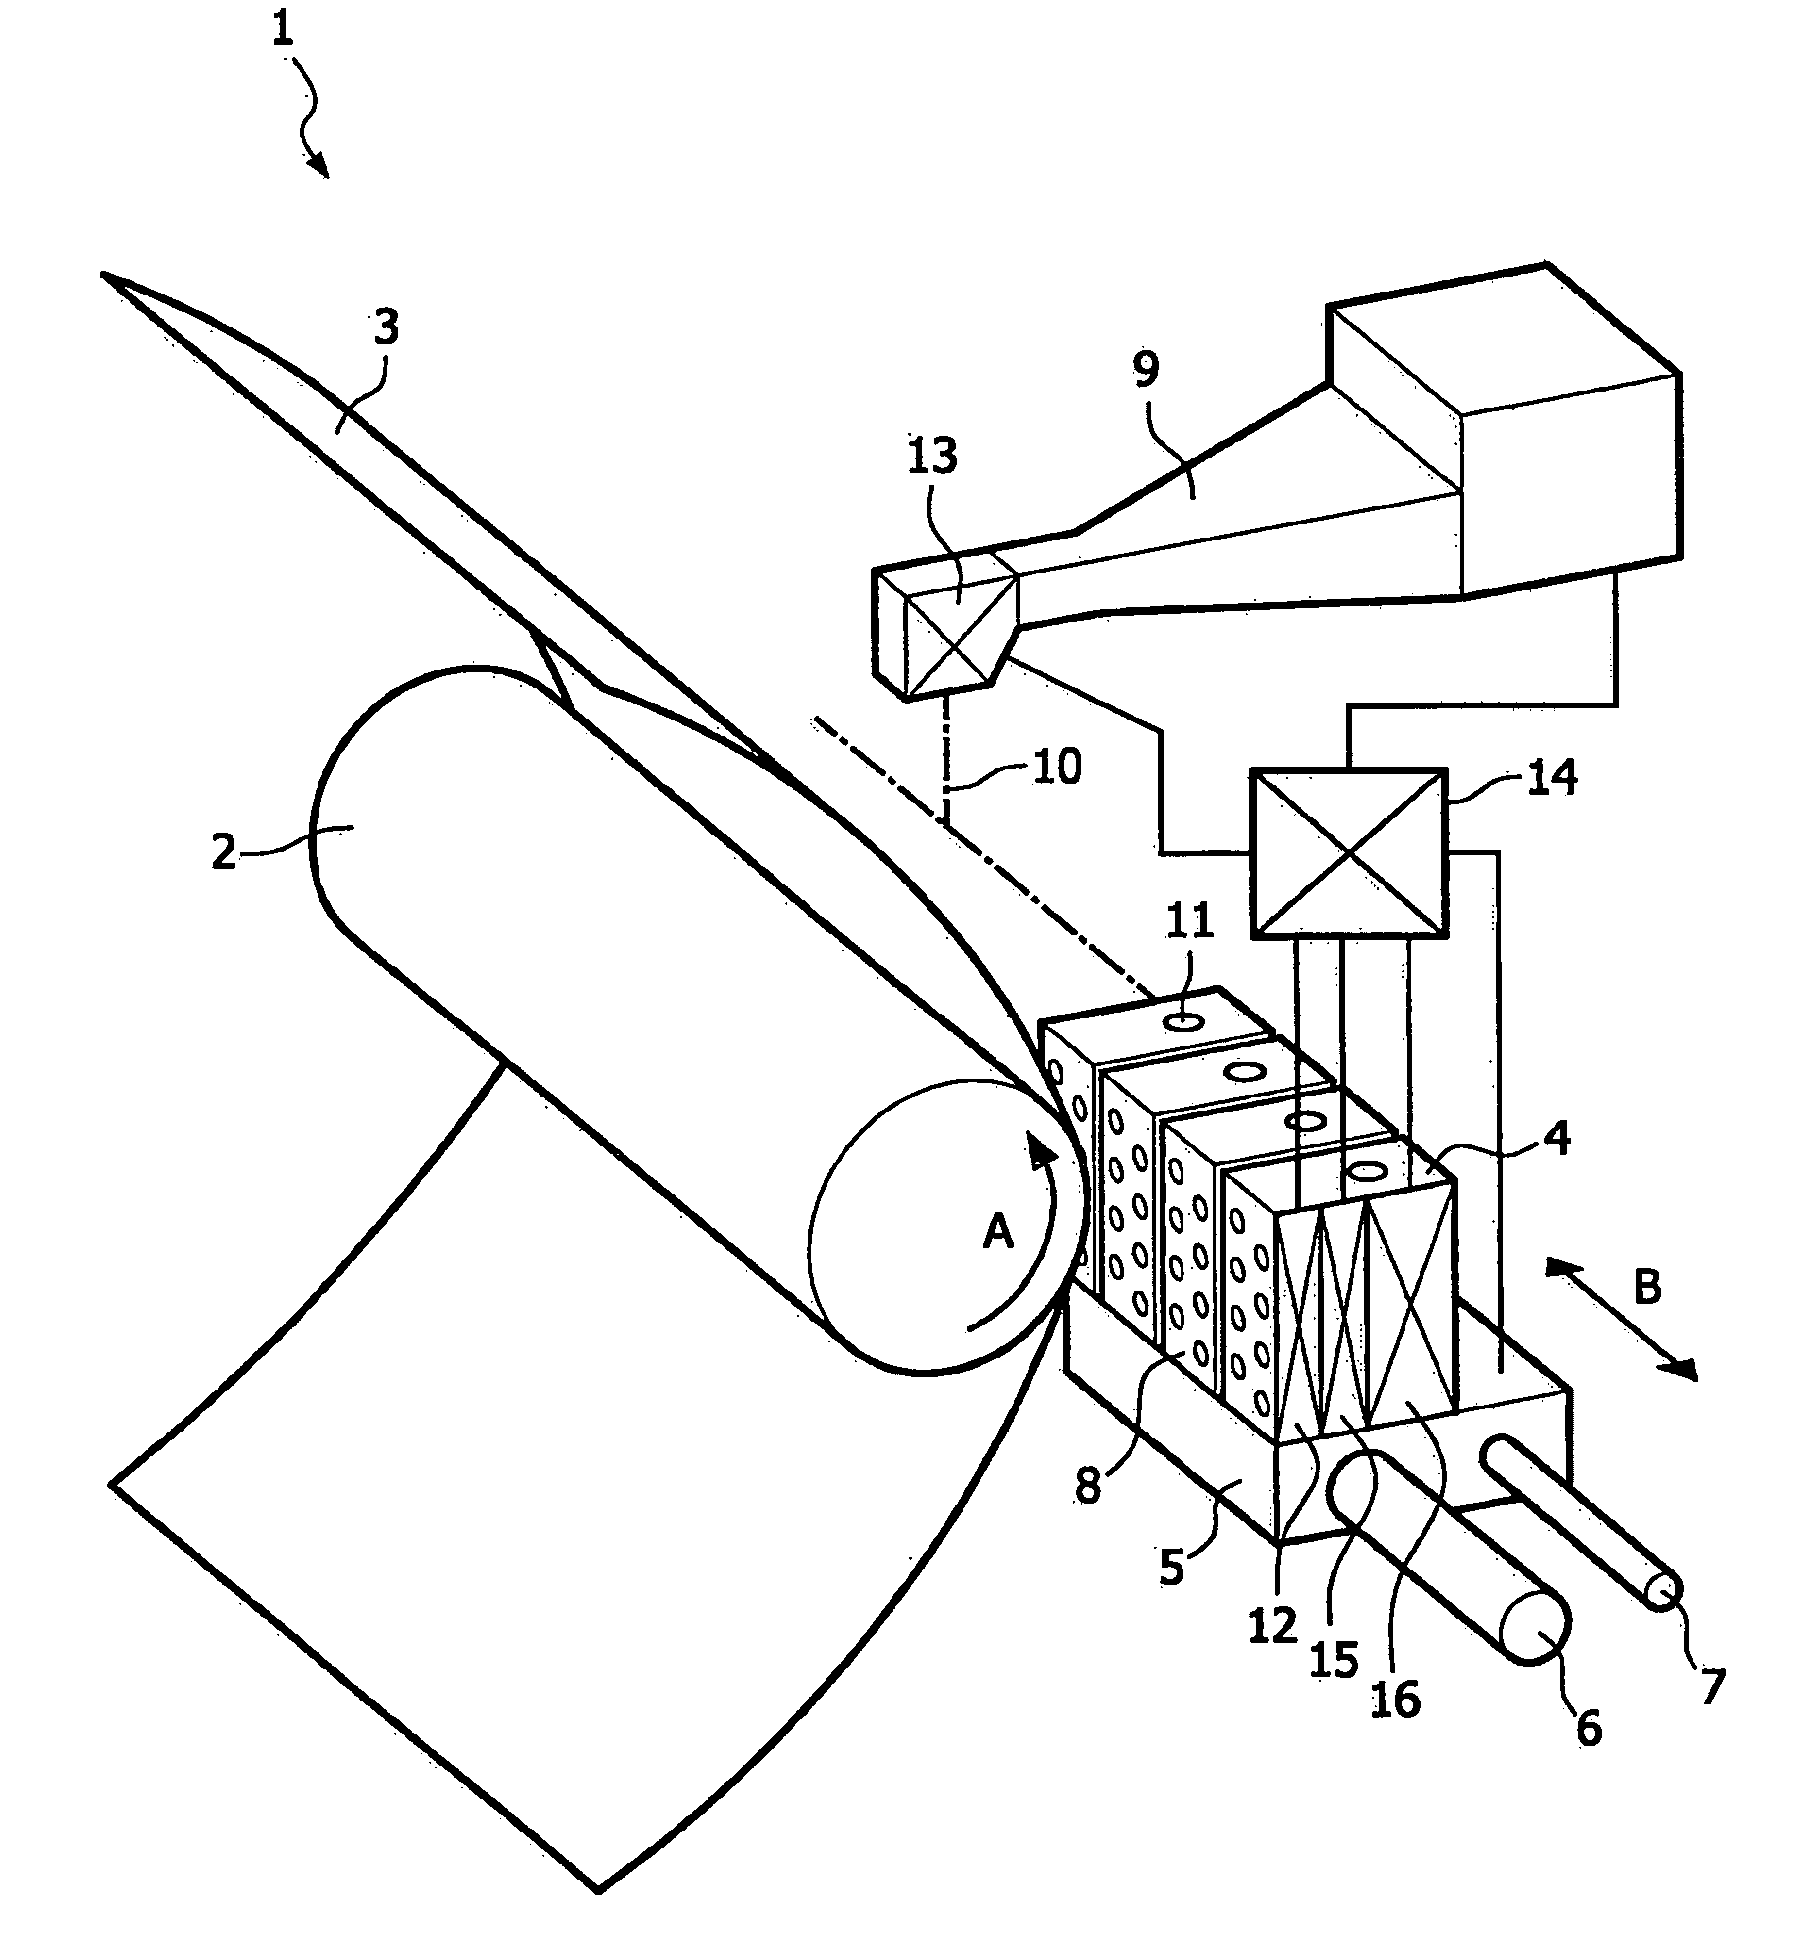 Method of improved controlling of an ink jet printer, and ink jet printer